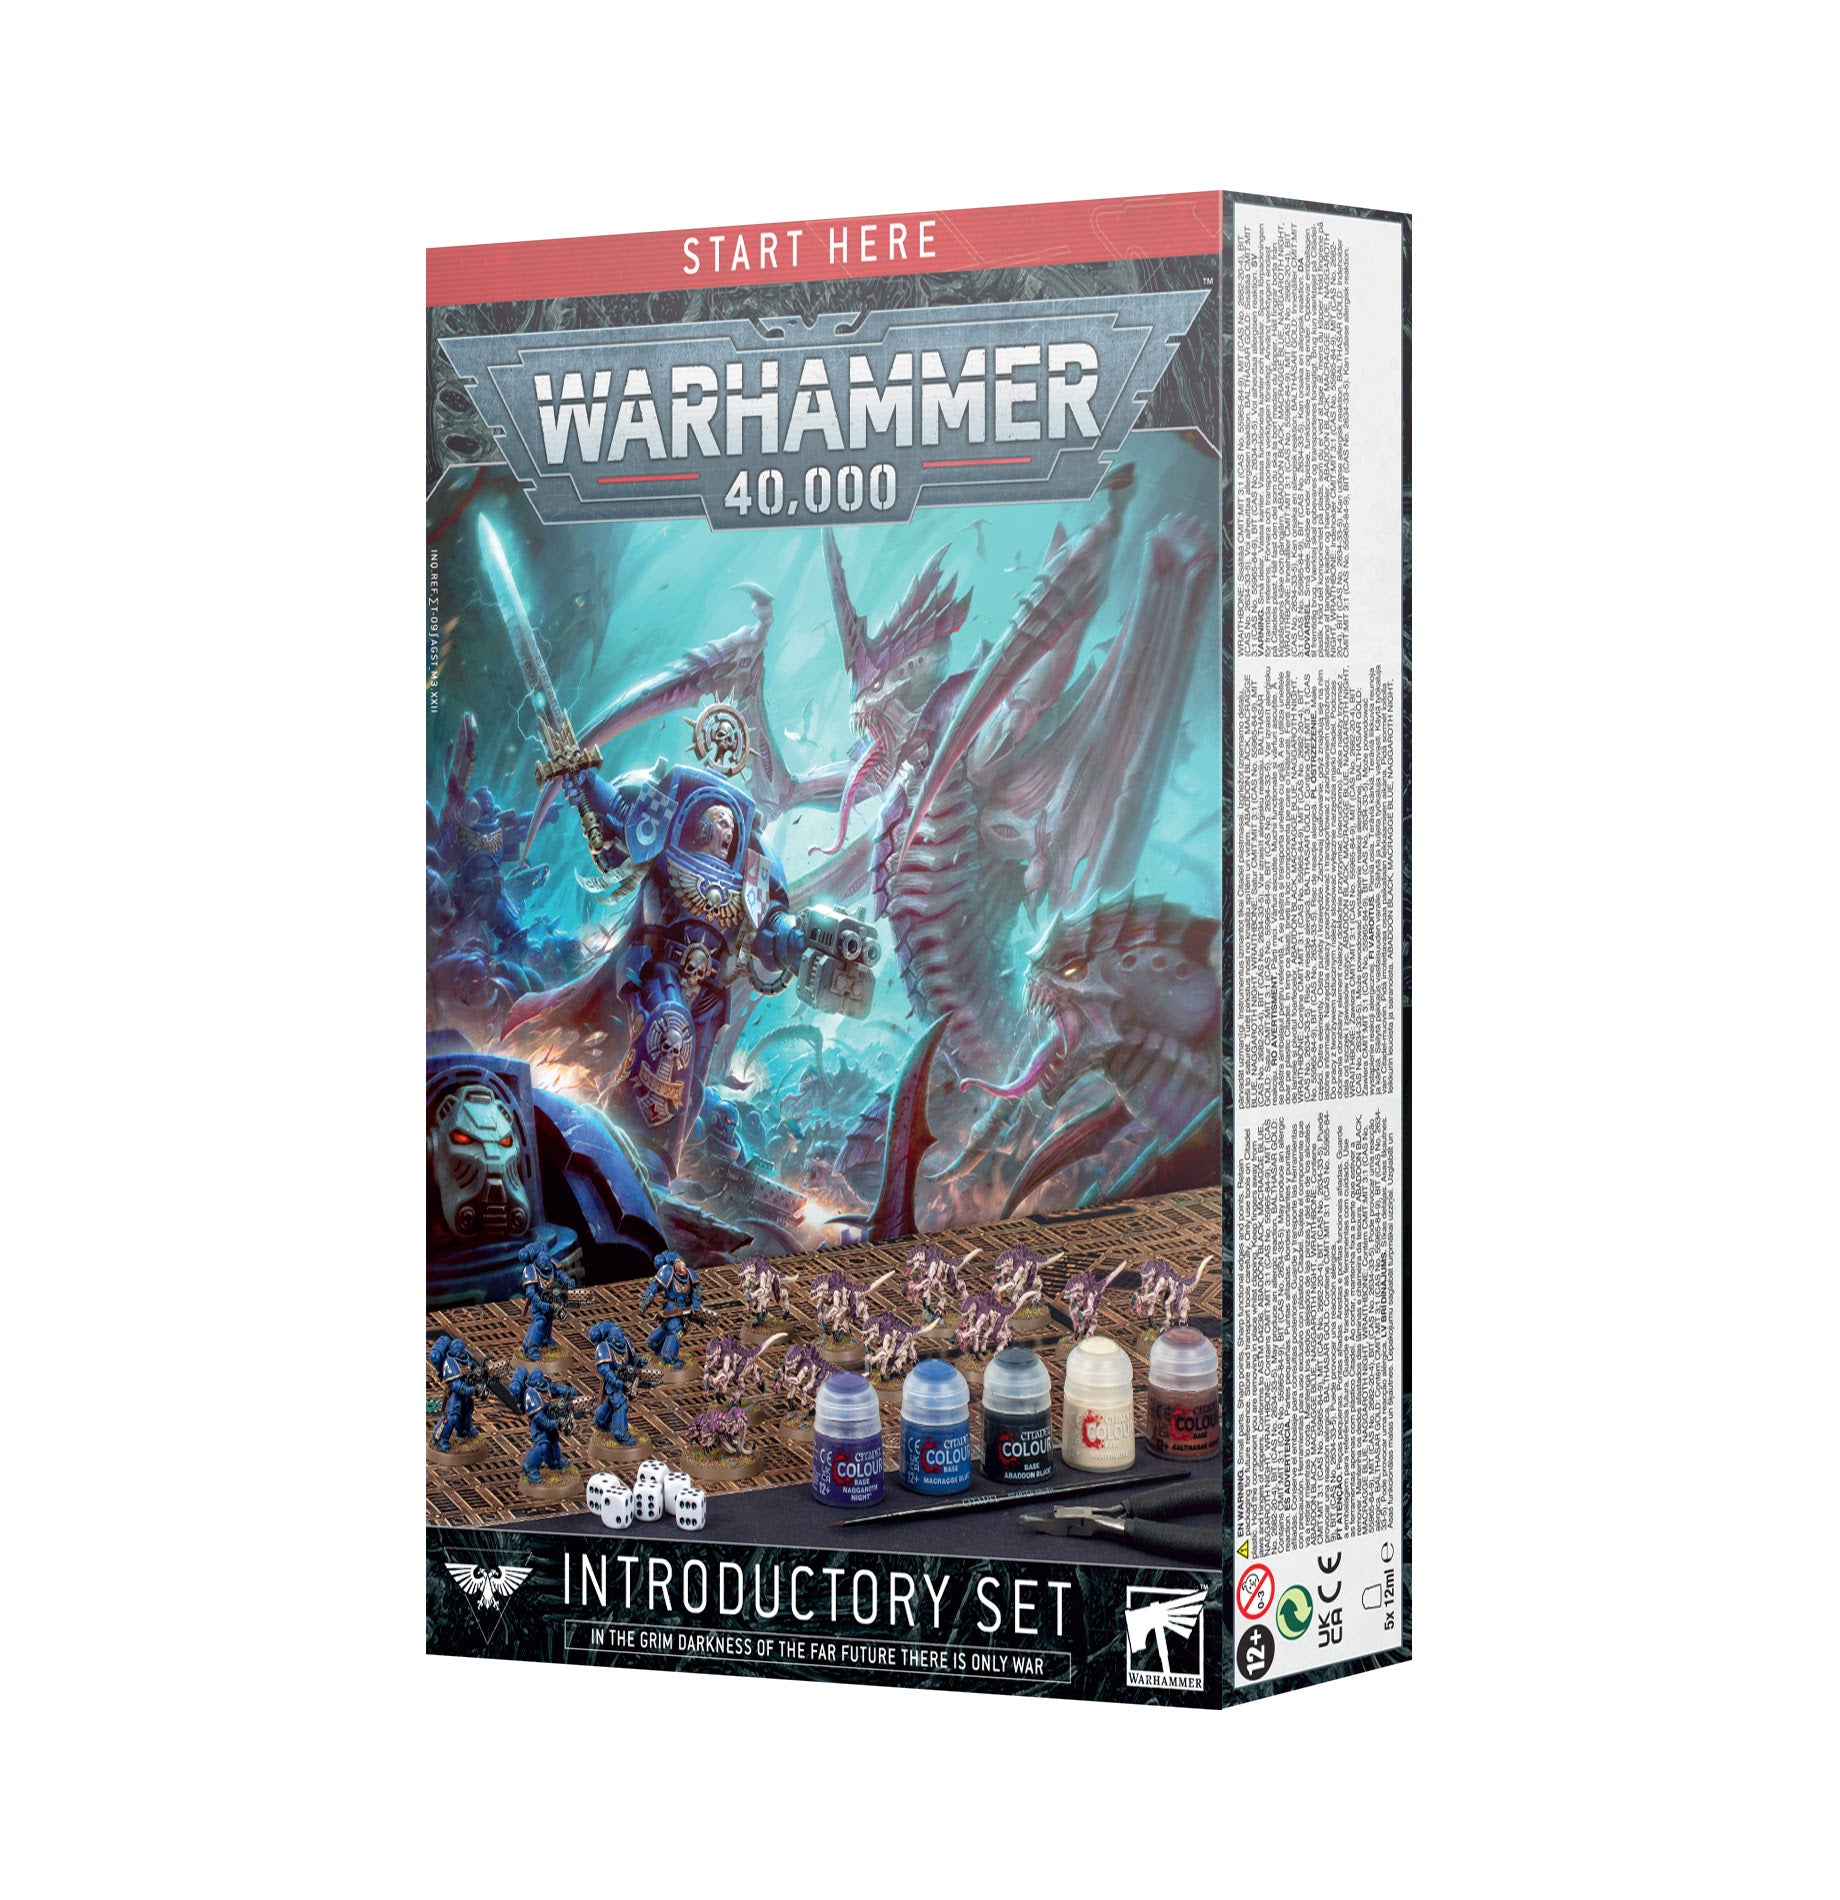 Warhammer 40,000: Introductory Set - Release Date 22/7/23 - Loaded Dice Barry Vale of Glamorgan CF64 3HD